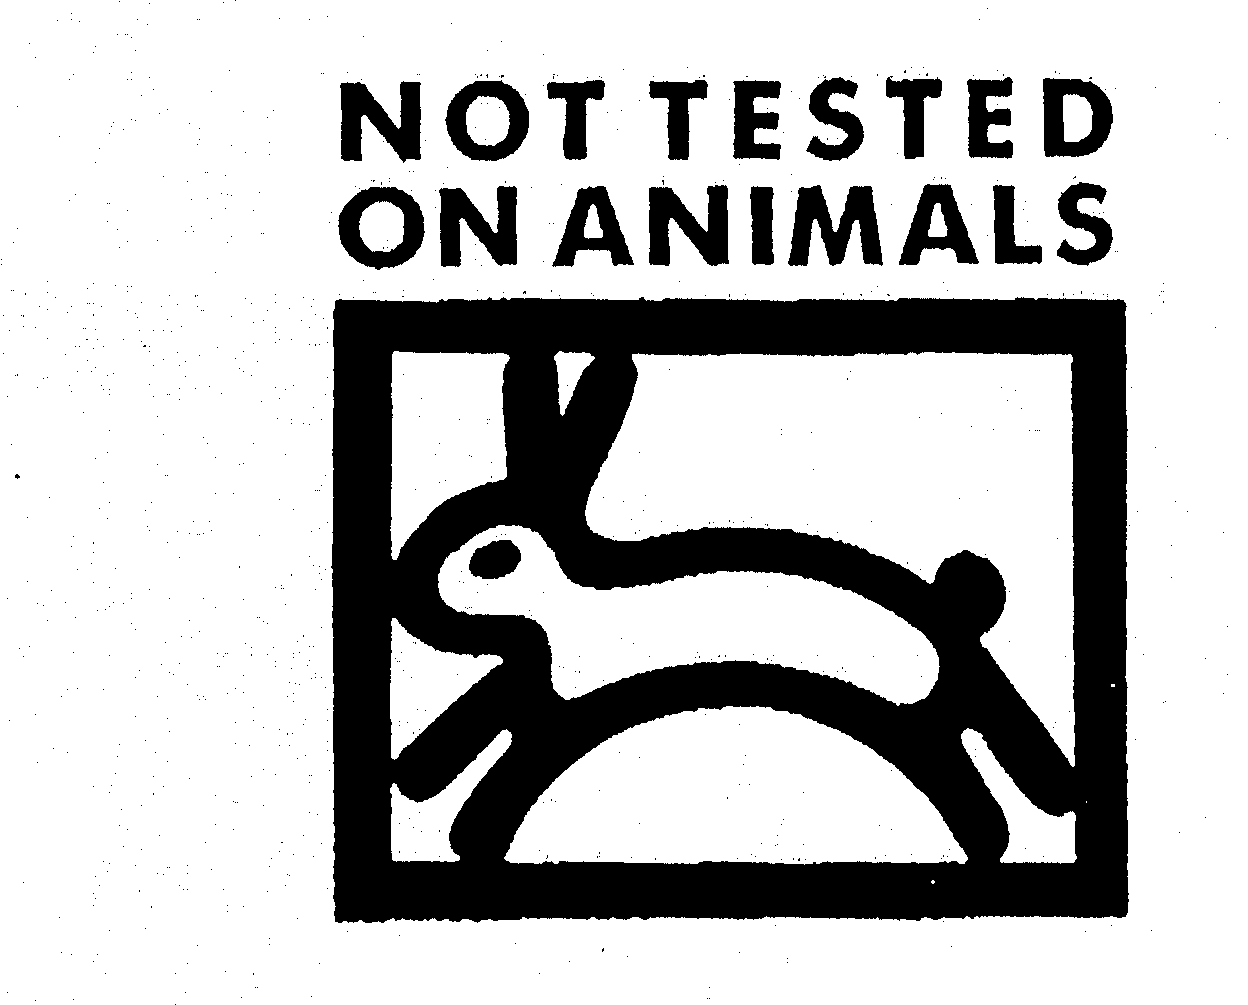  NOT TESTED ON ANIMALS